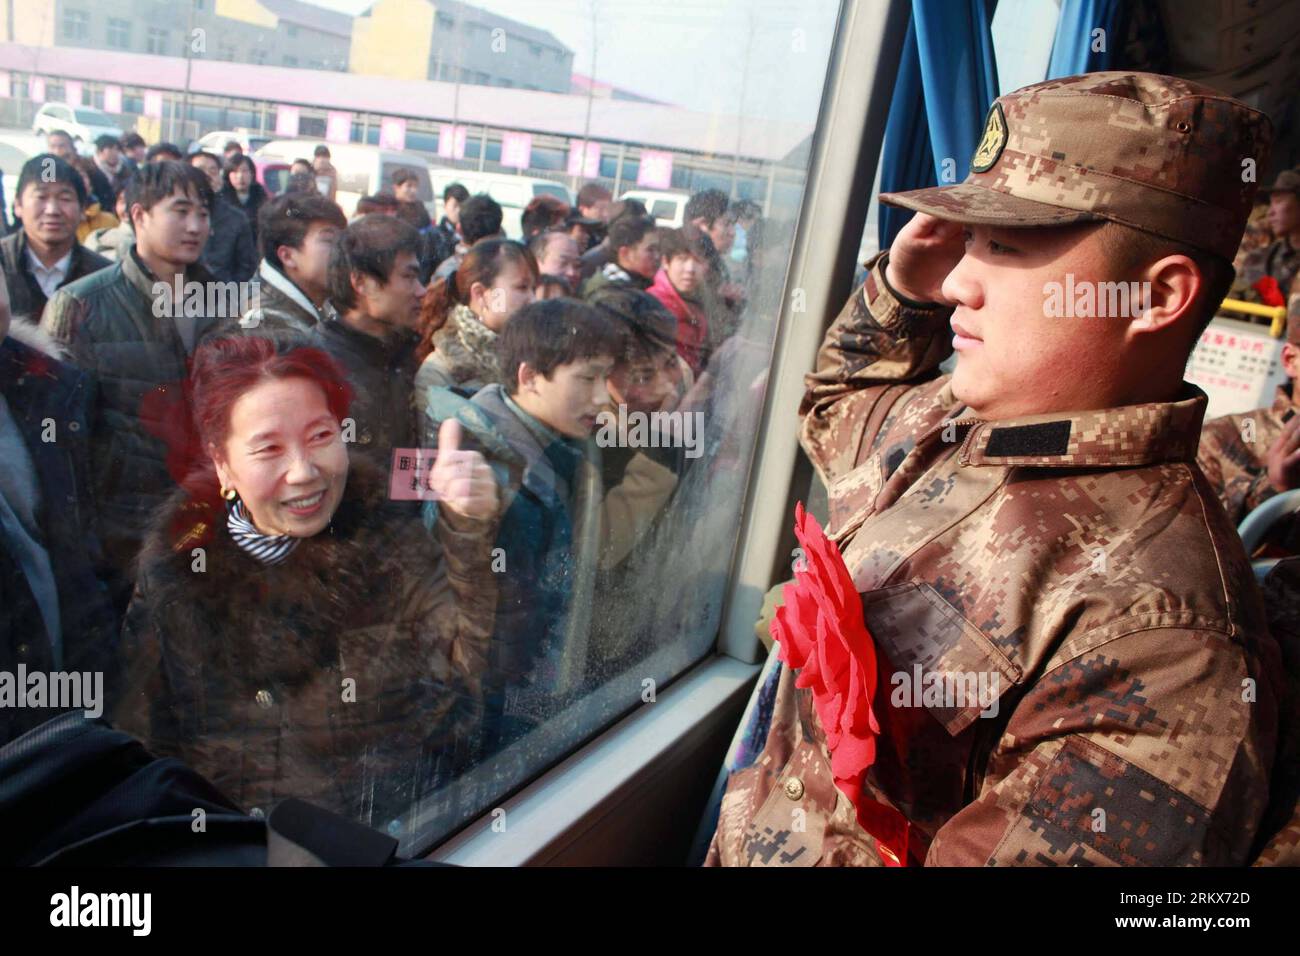 Bildnummer: 58903897  Datum: 10.12.2012  Copyright: imago/Xinhua (121210) -- HANDAN, Dec. 10, 2012 (Xinhua) -- A newly recruited soldier of People s Liberation Army (PLA) salutes to his mother before setting off in Cheng an County, north China s Hebei Province, Dec. 10, 2012. (Xinhua/Chang Hutao) (zc) CHINA-RECRUITS-SETTING OFF (CN) PUBLICATIONxNOTxINxCHN Gesellschaft Militär Rekruten Einberufung Rekrutierung Soldat x0x xac 2012 quer      58903897 Date 10 12 2012 Copyright Imago XINHUA  Handan DEC 10 2012 XINHUA a newly  Soldier of Celebrities S Liberation Army PLA salutes to His Mother Before Stock Photo